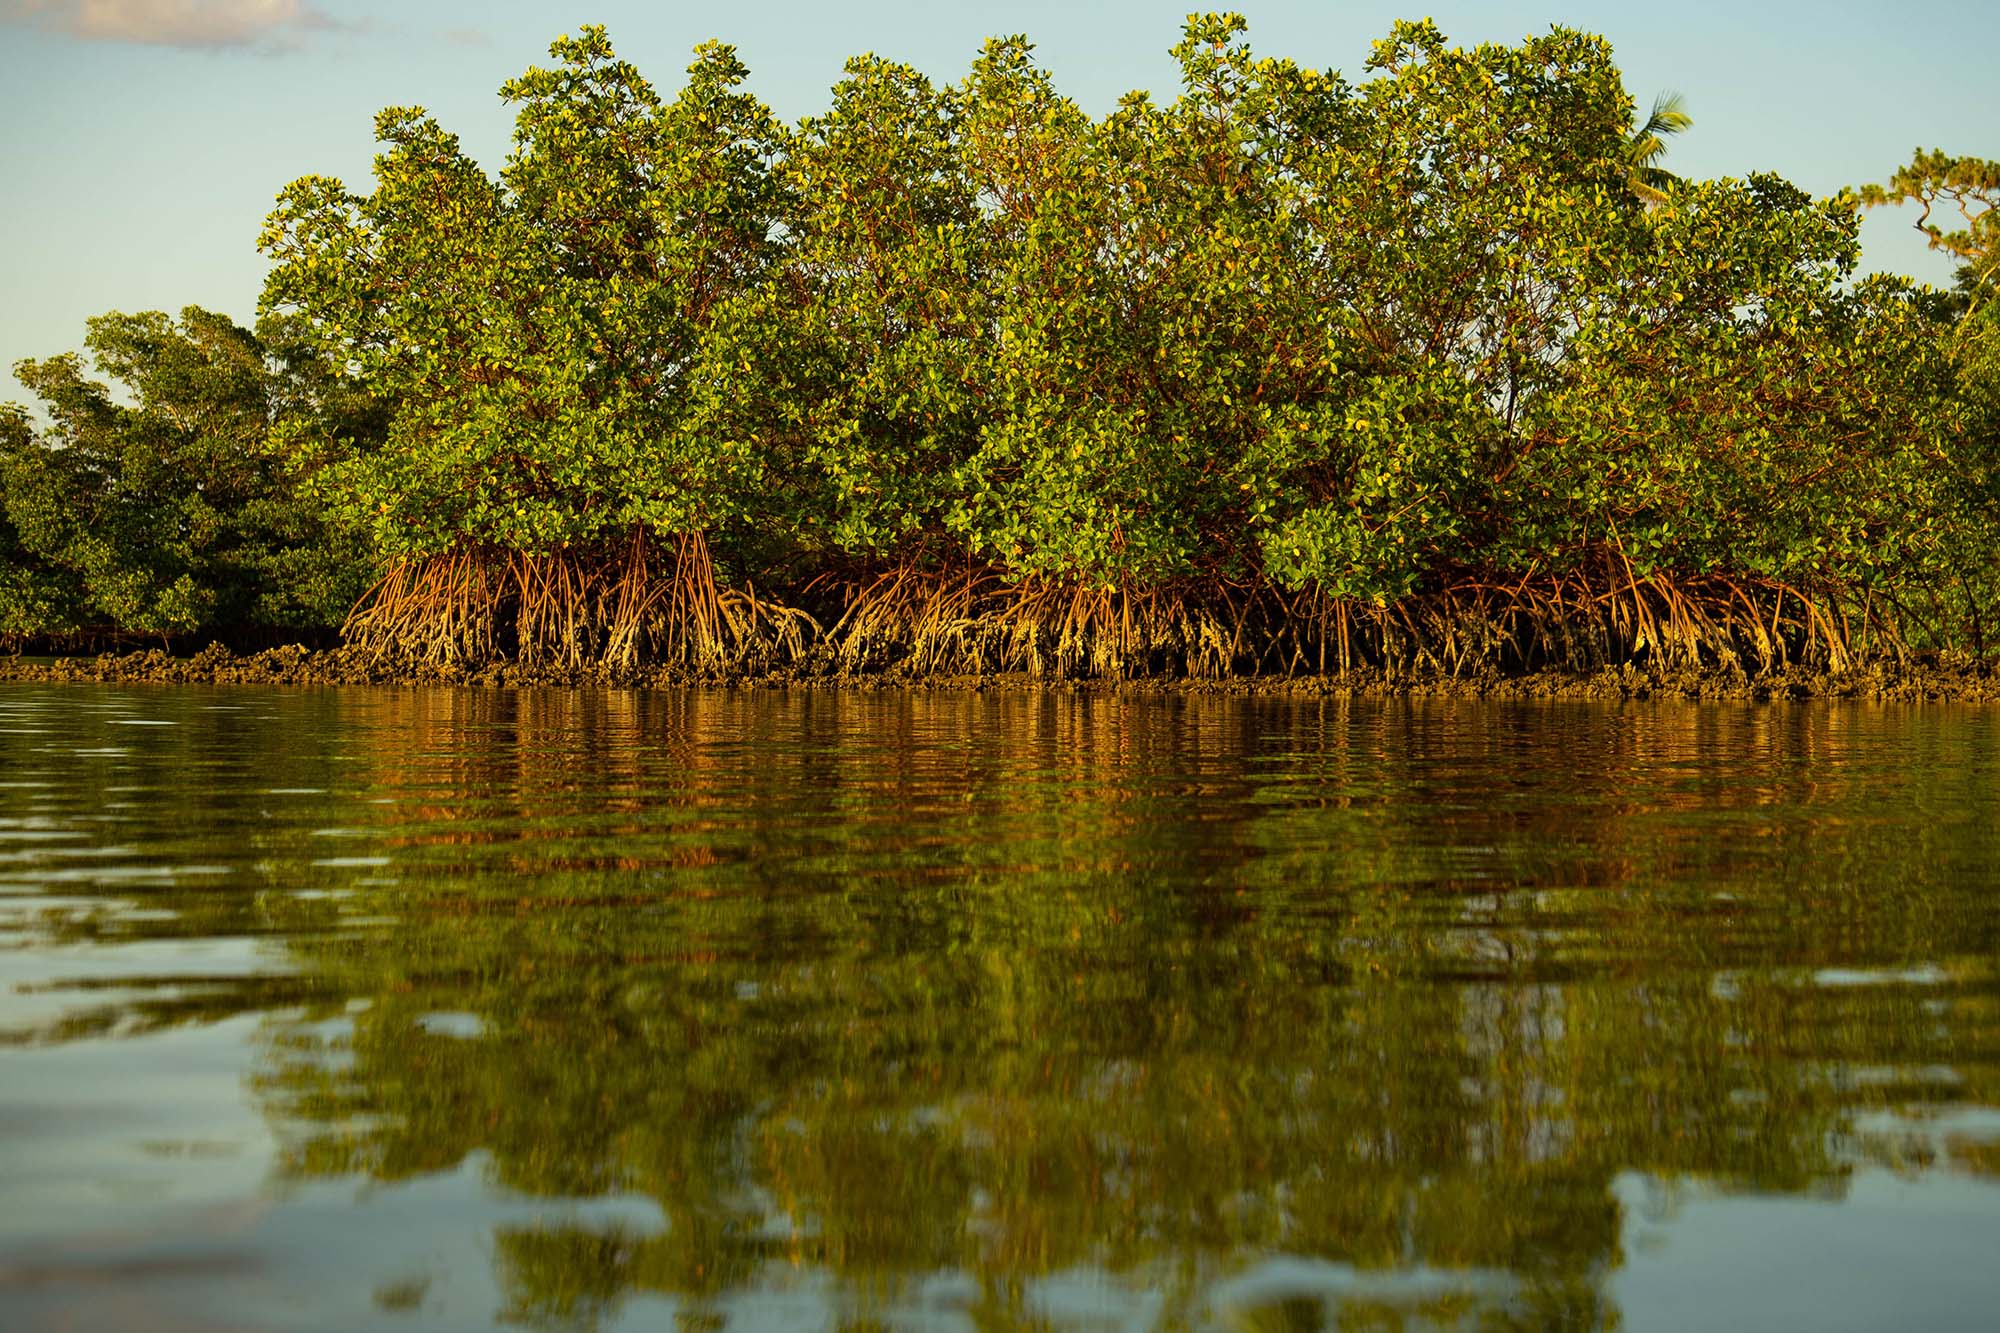 Mangroves photographed in morning light